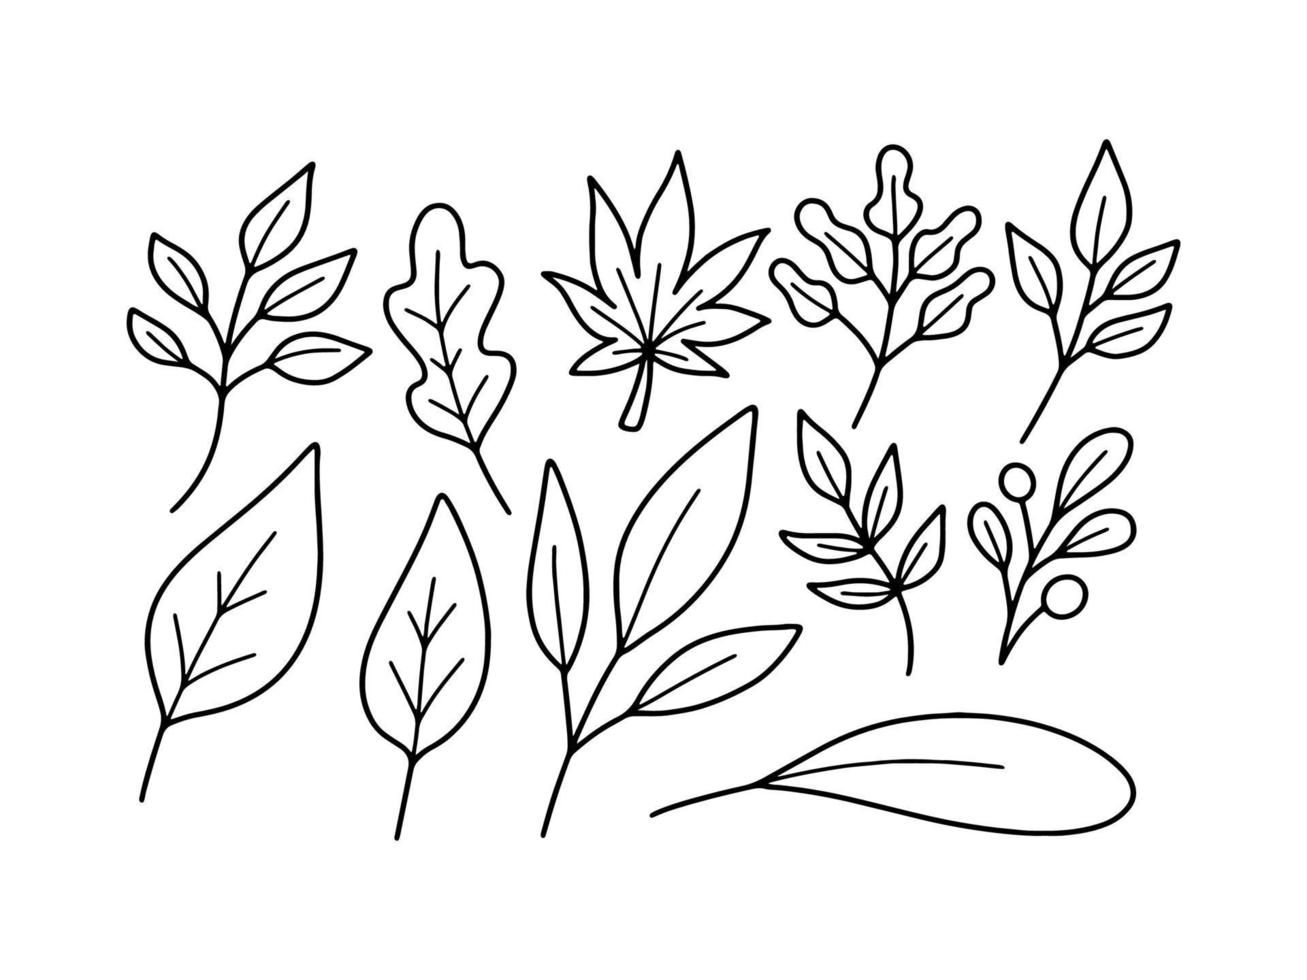 Collection of Autumn Leaf Doodle Illustration vector